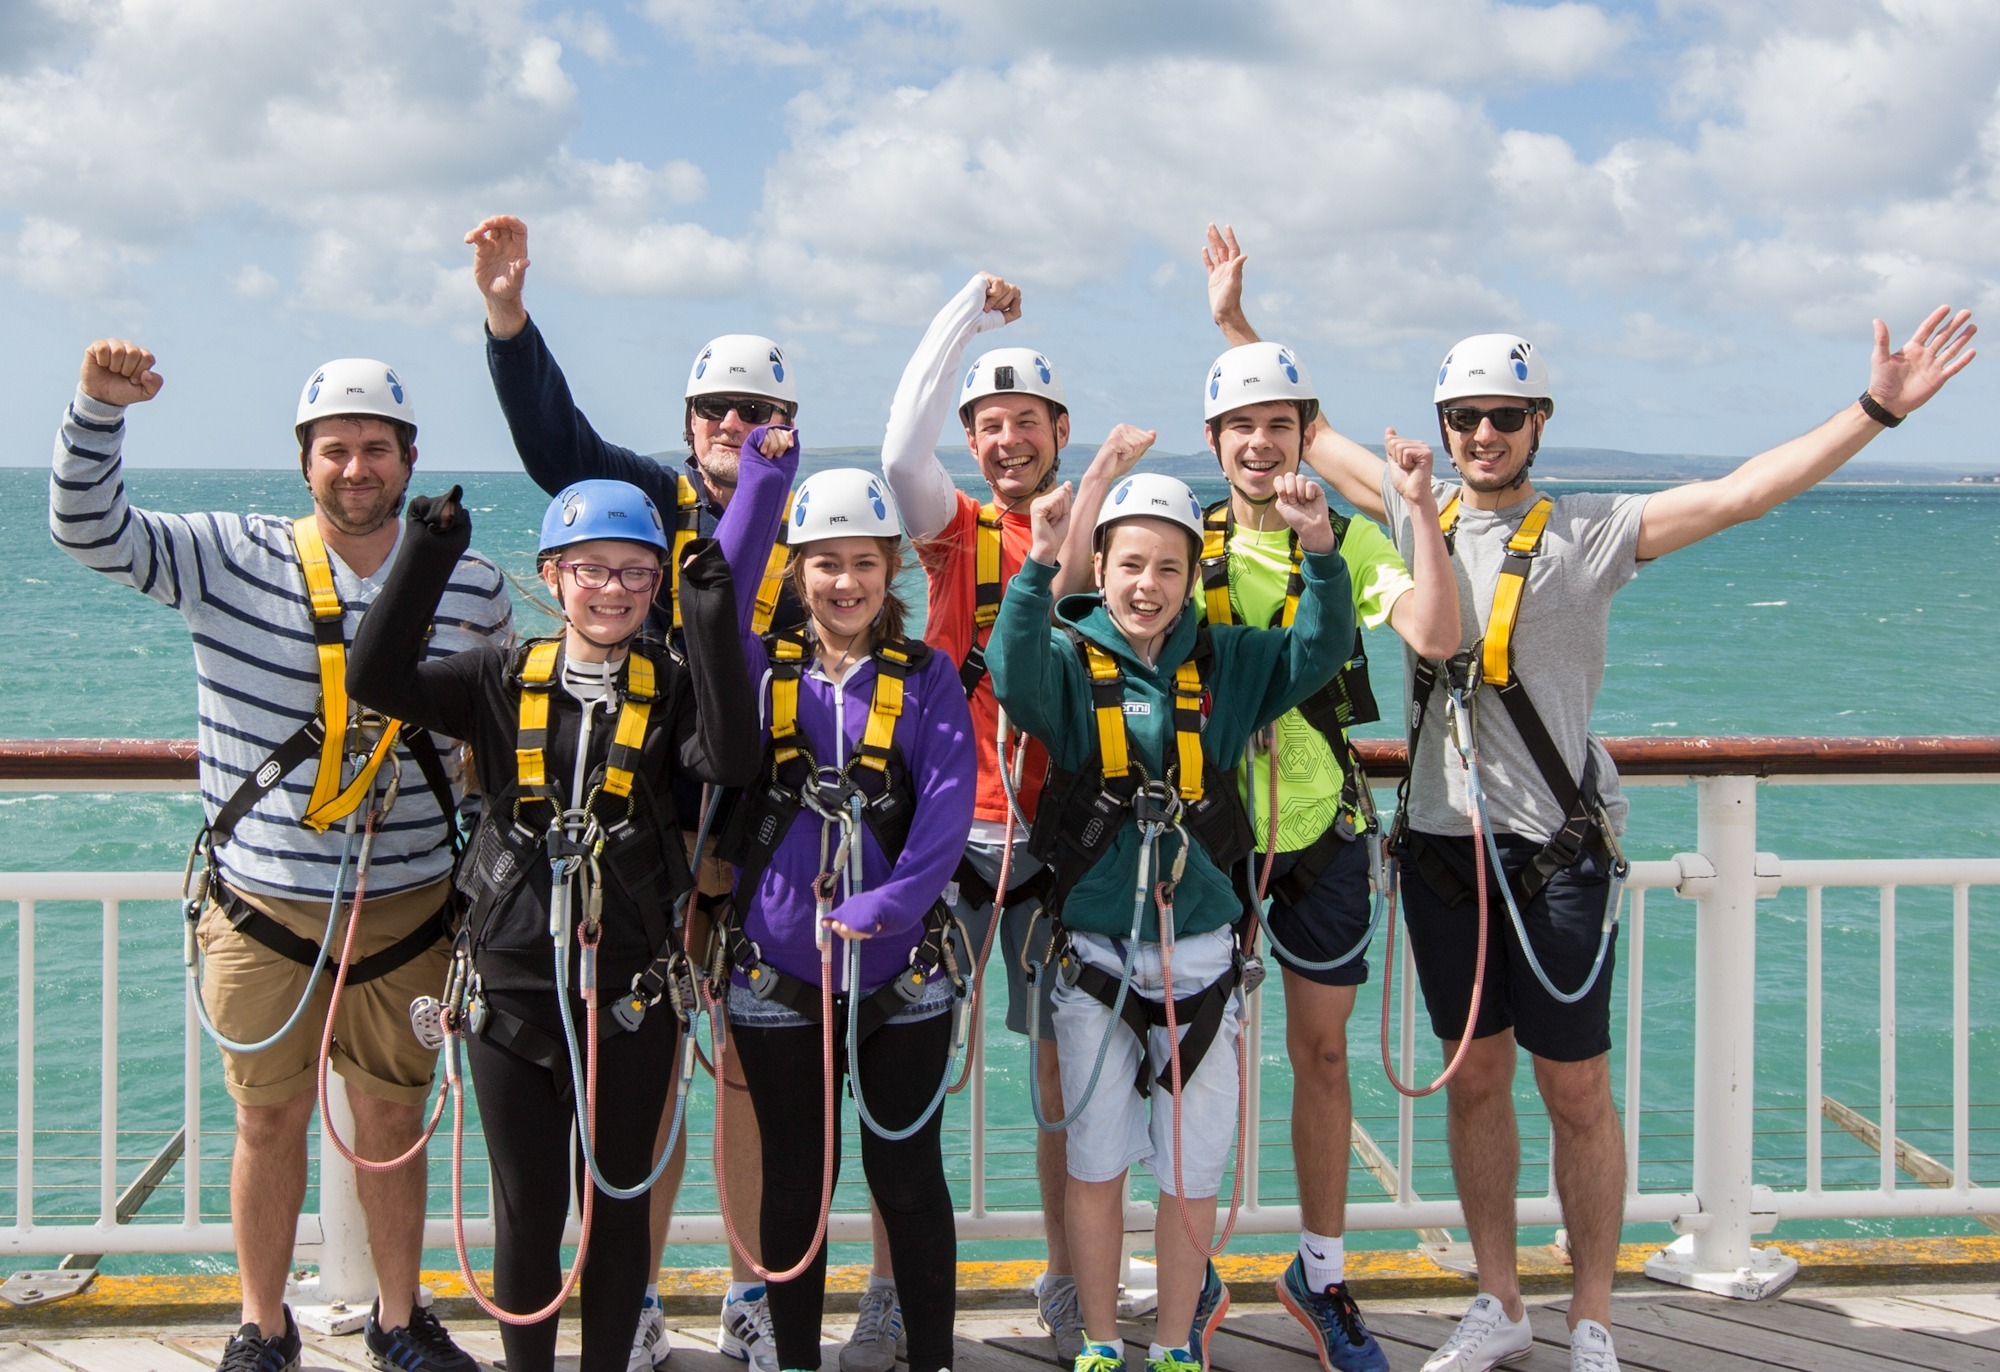 Boxing Day Zip Wire for just £10 – the alternative Christmas gift!